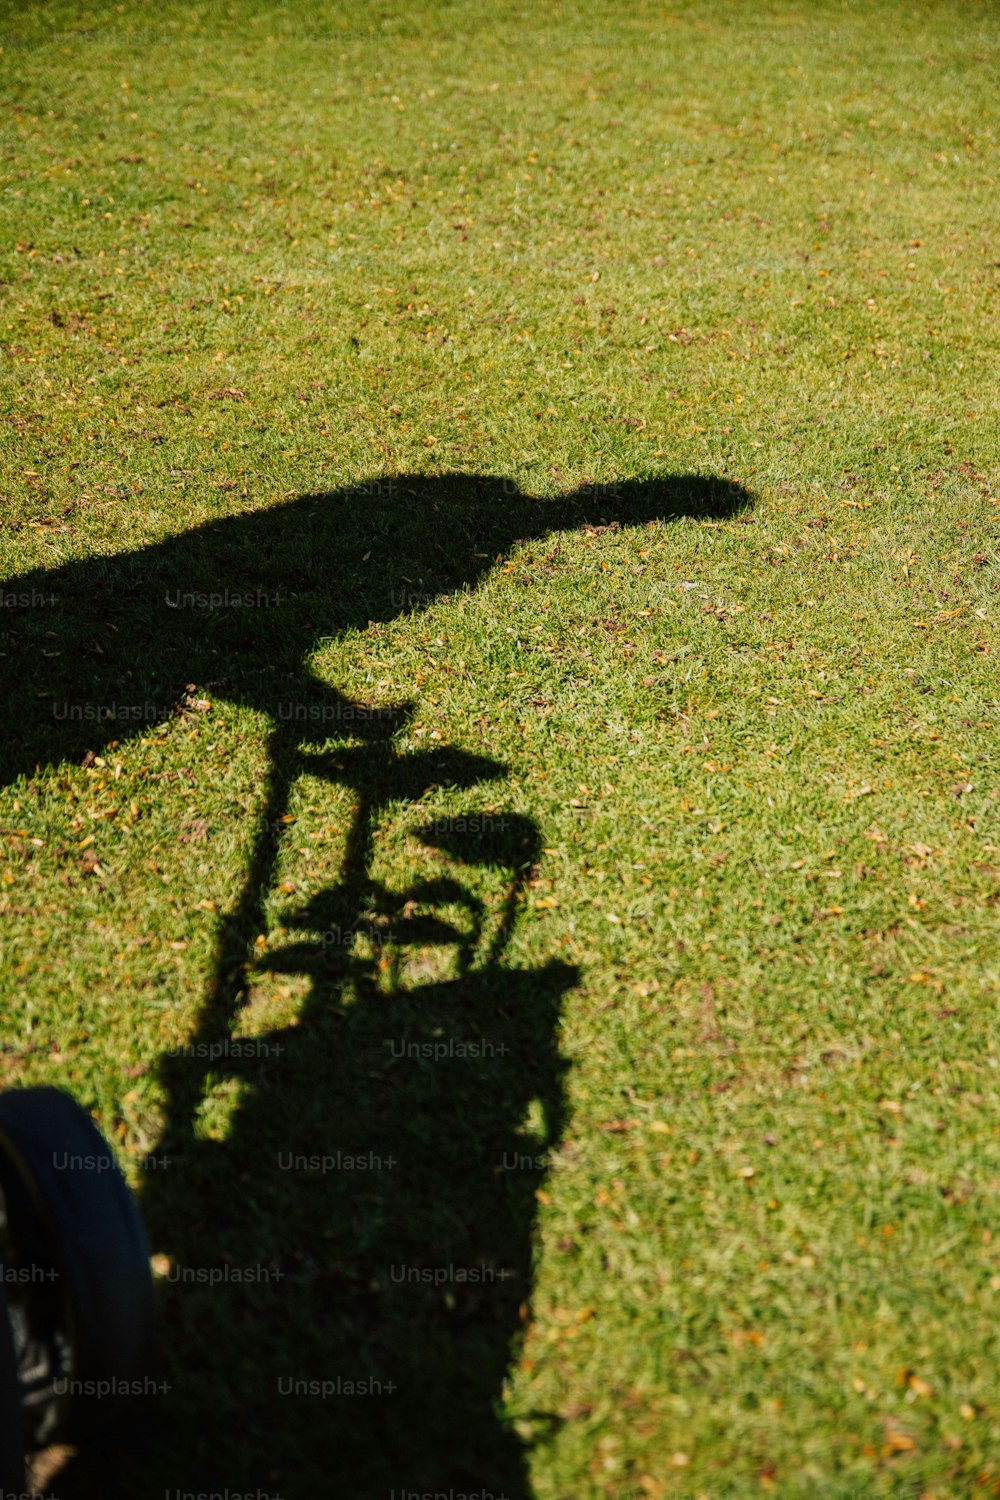 a shadow of a person riding a bike in the grass